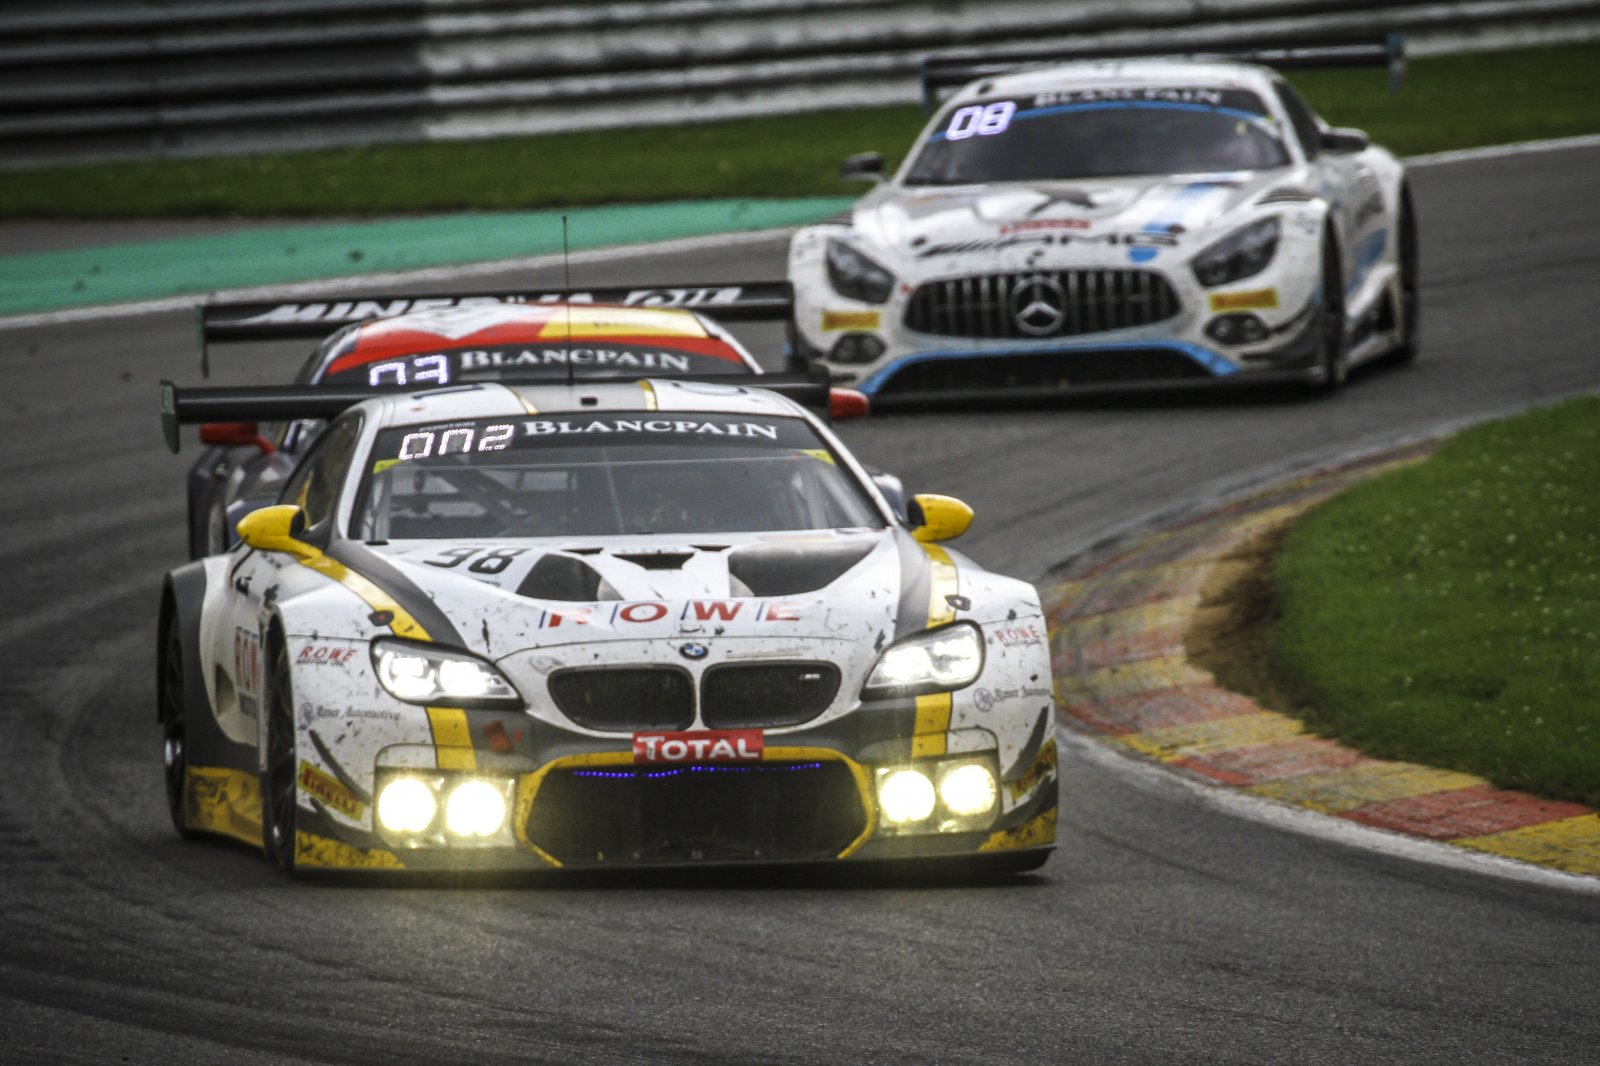 High noon at Spa: Eight cars, six brands still on the lead lap